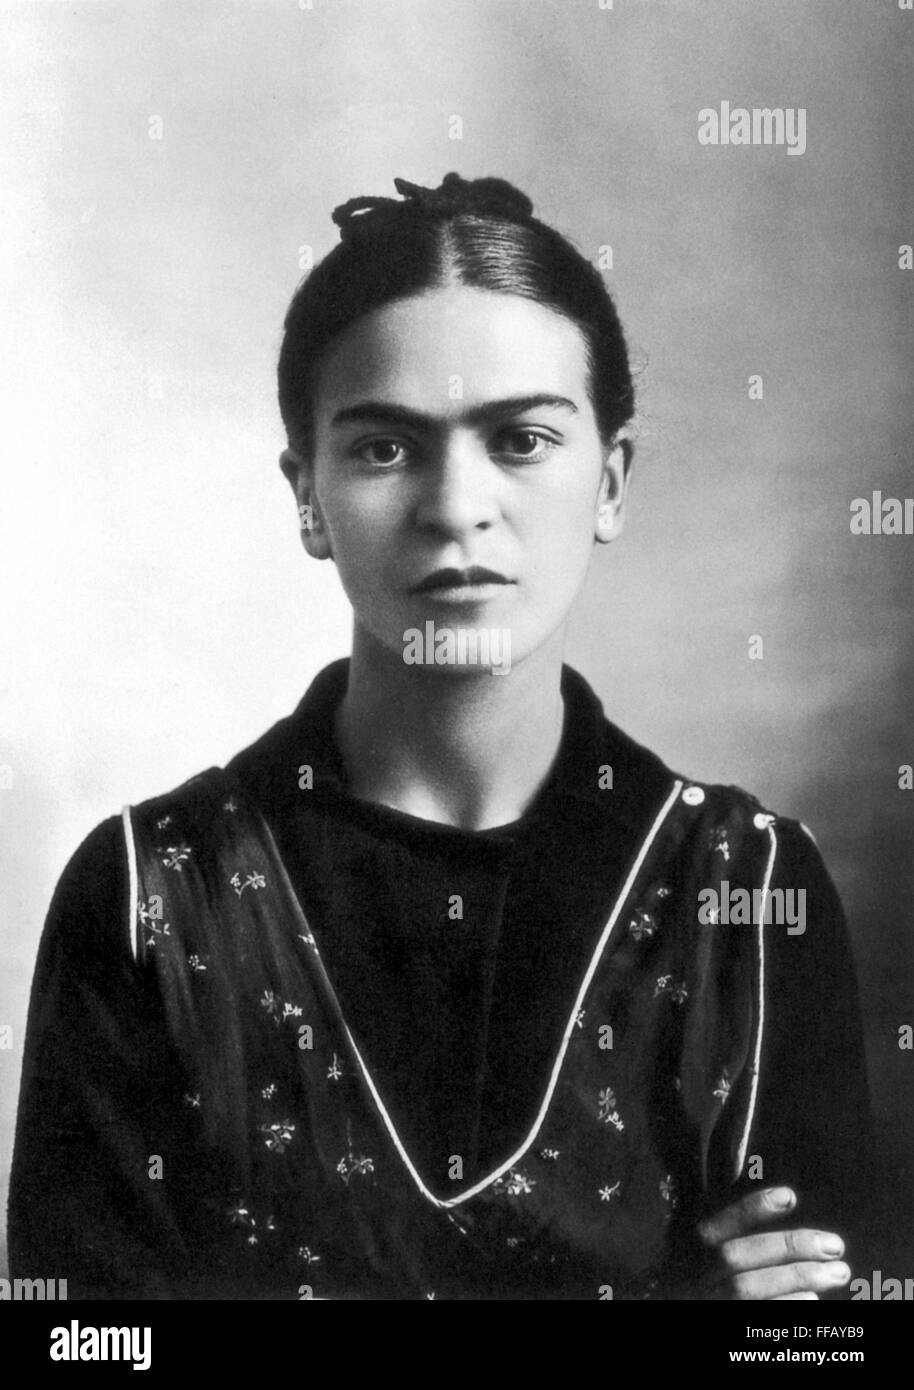 FRIDA KAHLO (1907-1954). /nMexican artist. Photographed by Guillermo Kahlo, Mexico City, 1932. Stock Photo